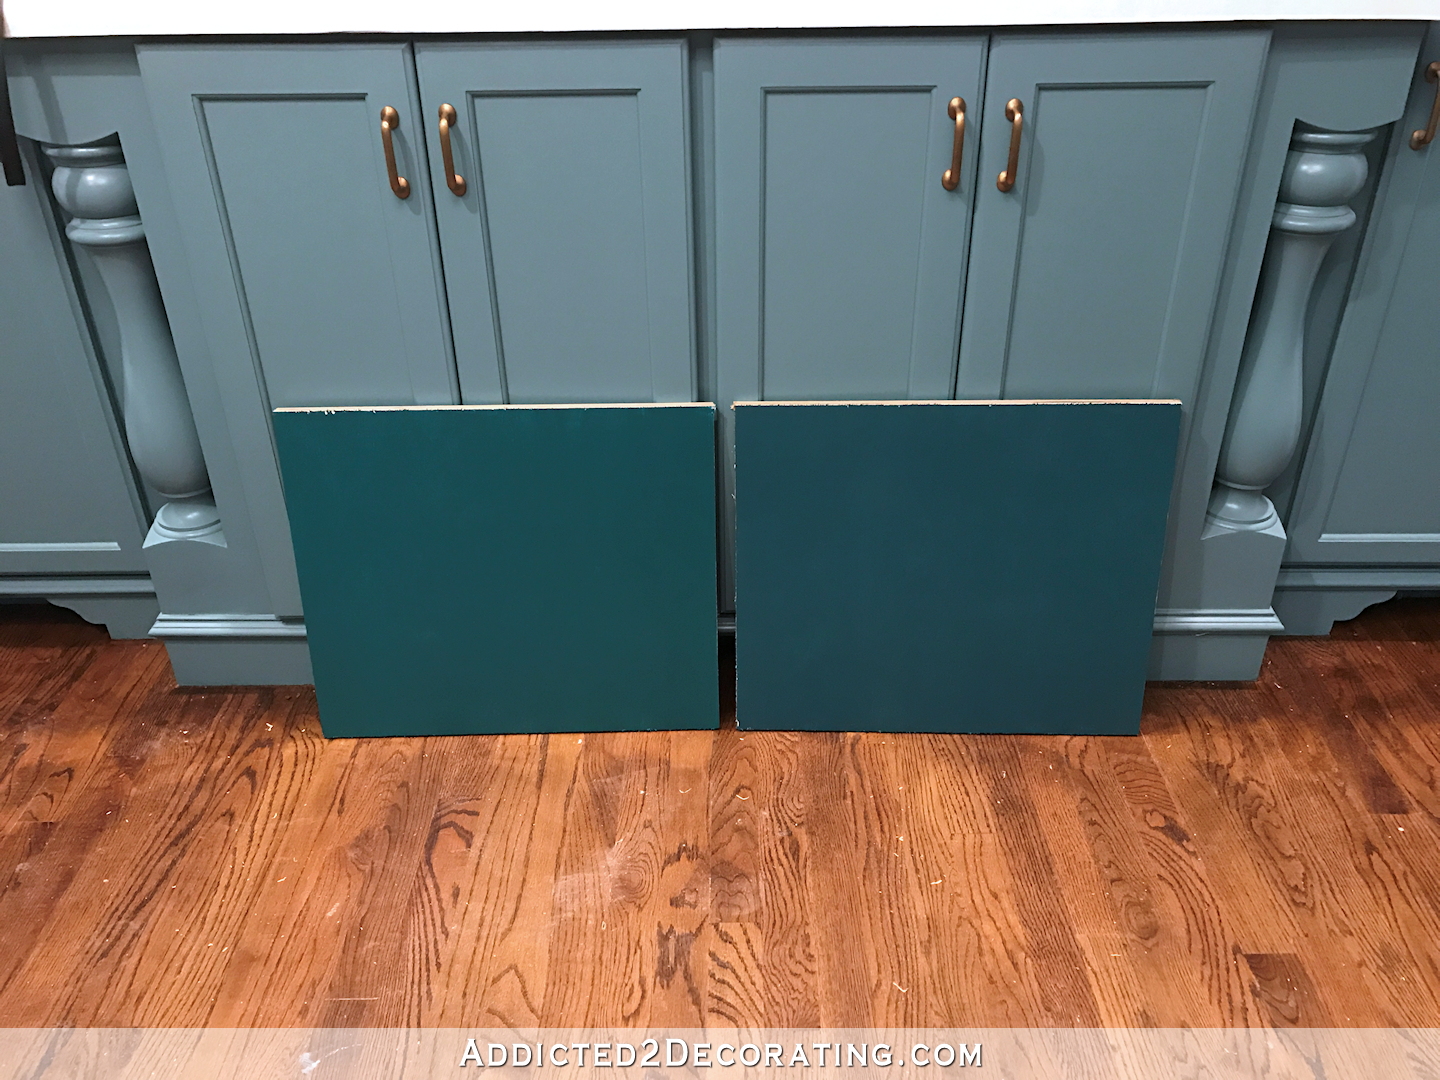 hallway paint color options with the kitchen cabinets